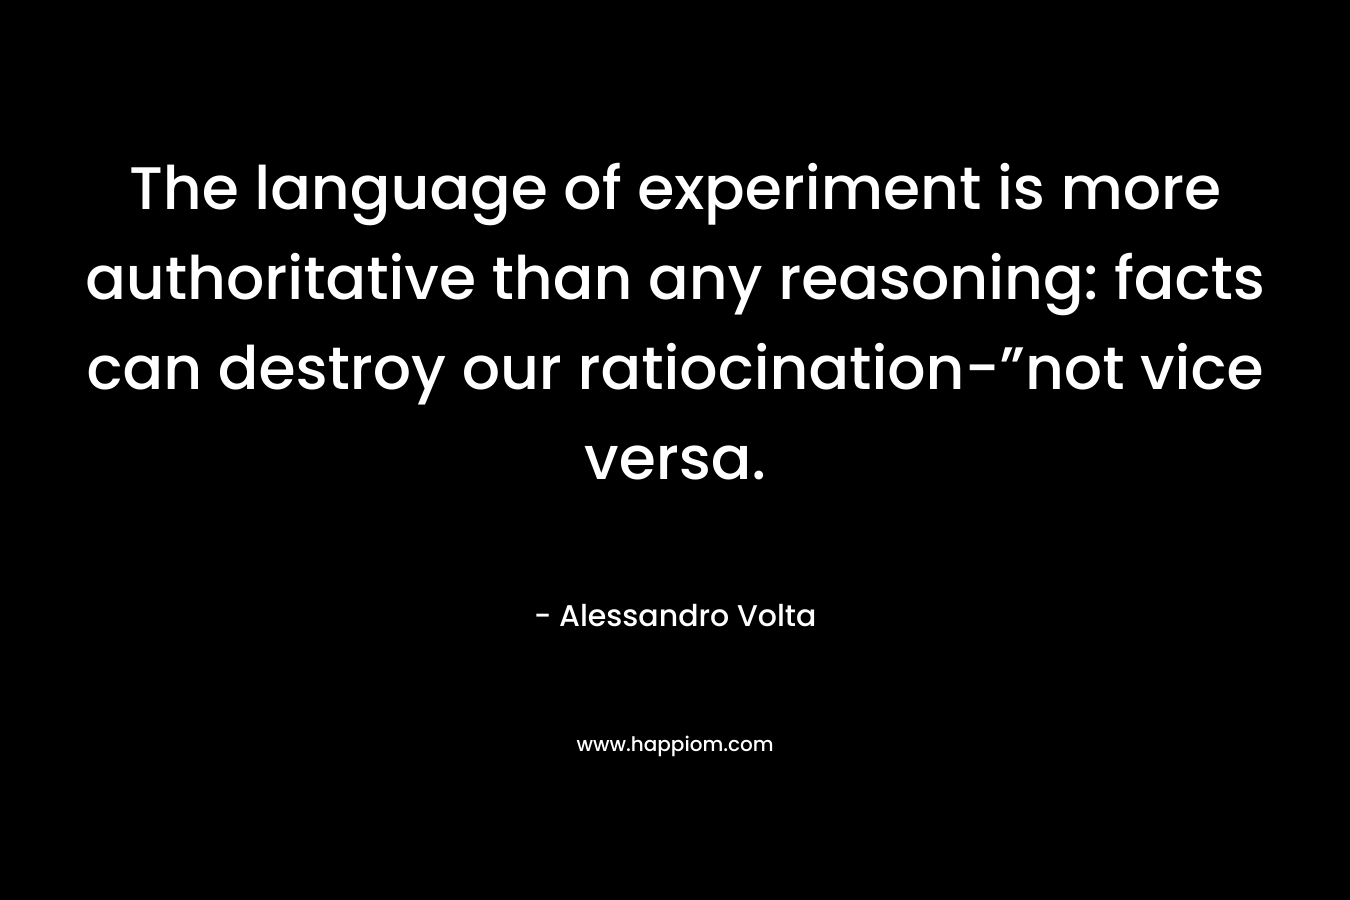 The language of experiment is more authoritative than any reasoning: facts can destroy our ratiocination-”not vice versa. – Alessandro Volta